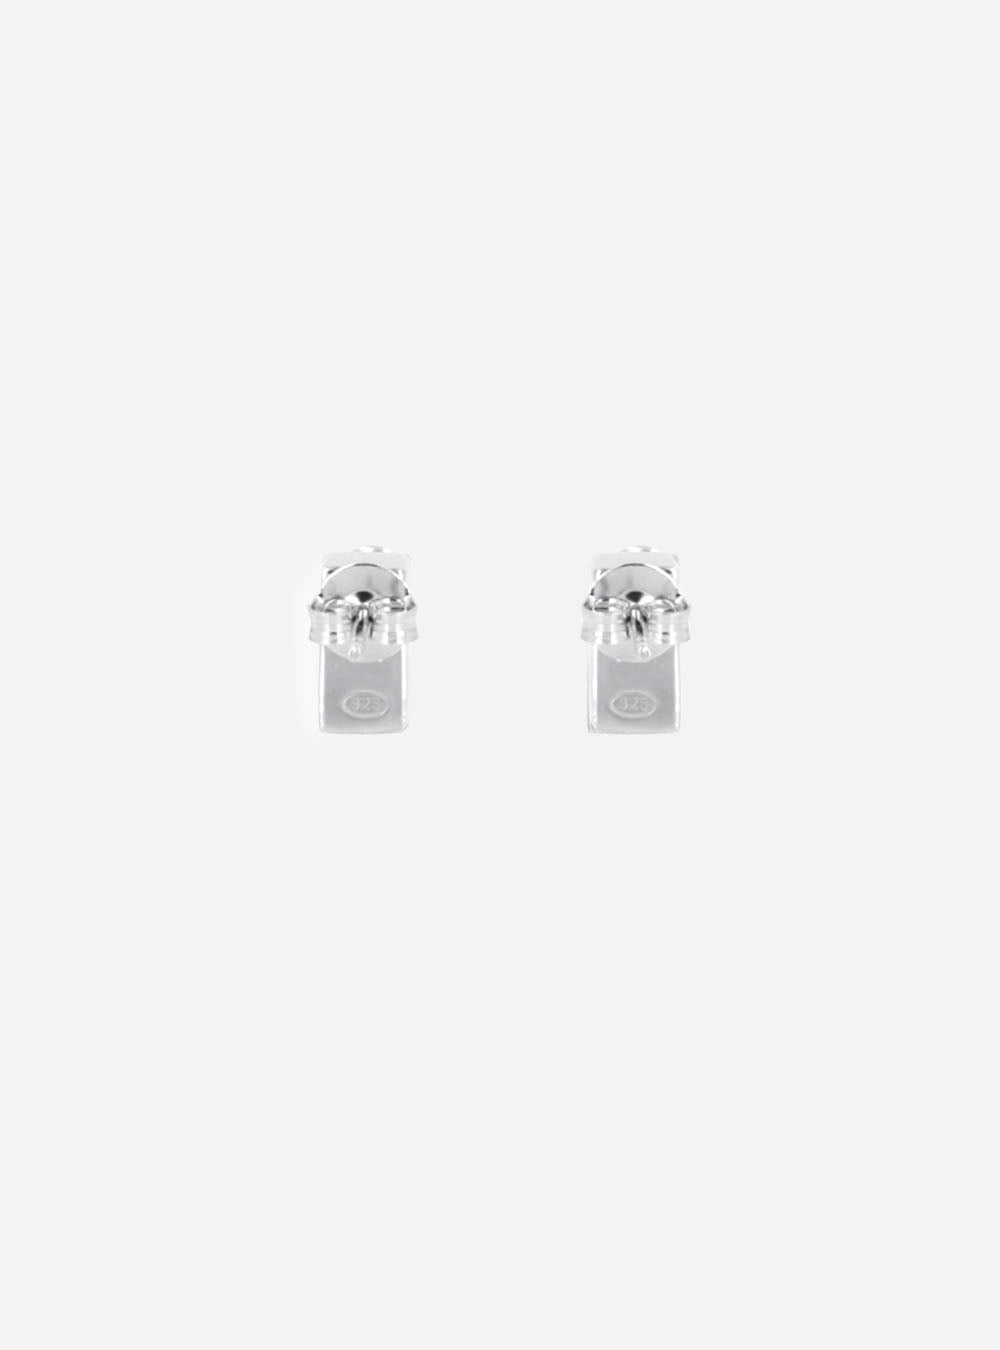 A pair of MIDNIGHTFACTORY Screwbox sapphire earrings on a white background.